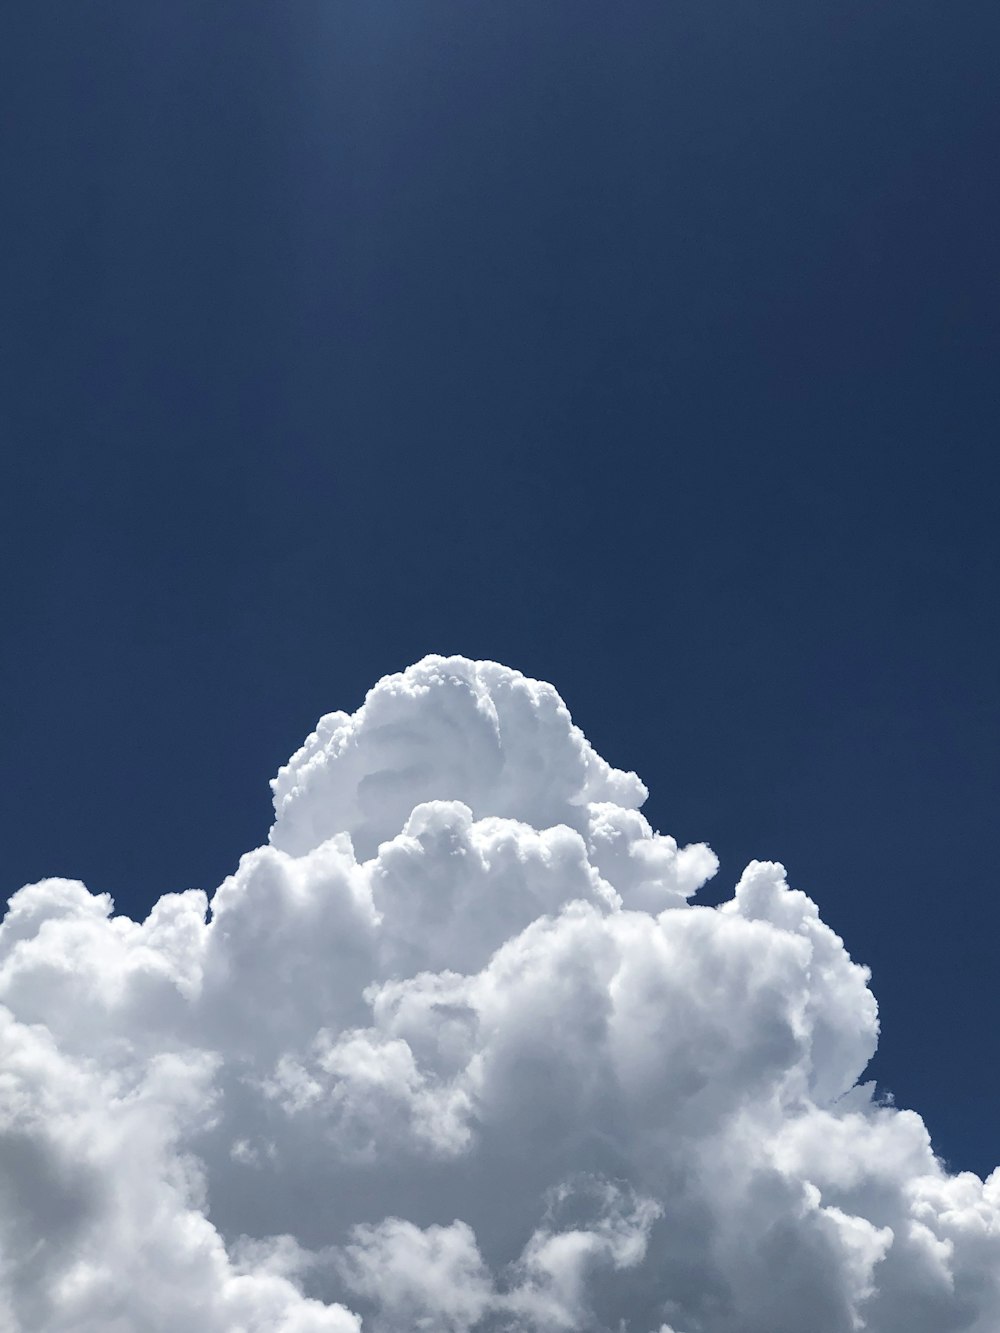 White Clouds And Blue Sky During Daytime Photo – Free Yunnan Sheng Image On  Unsplash